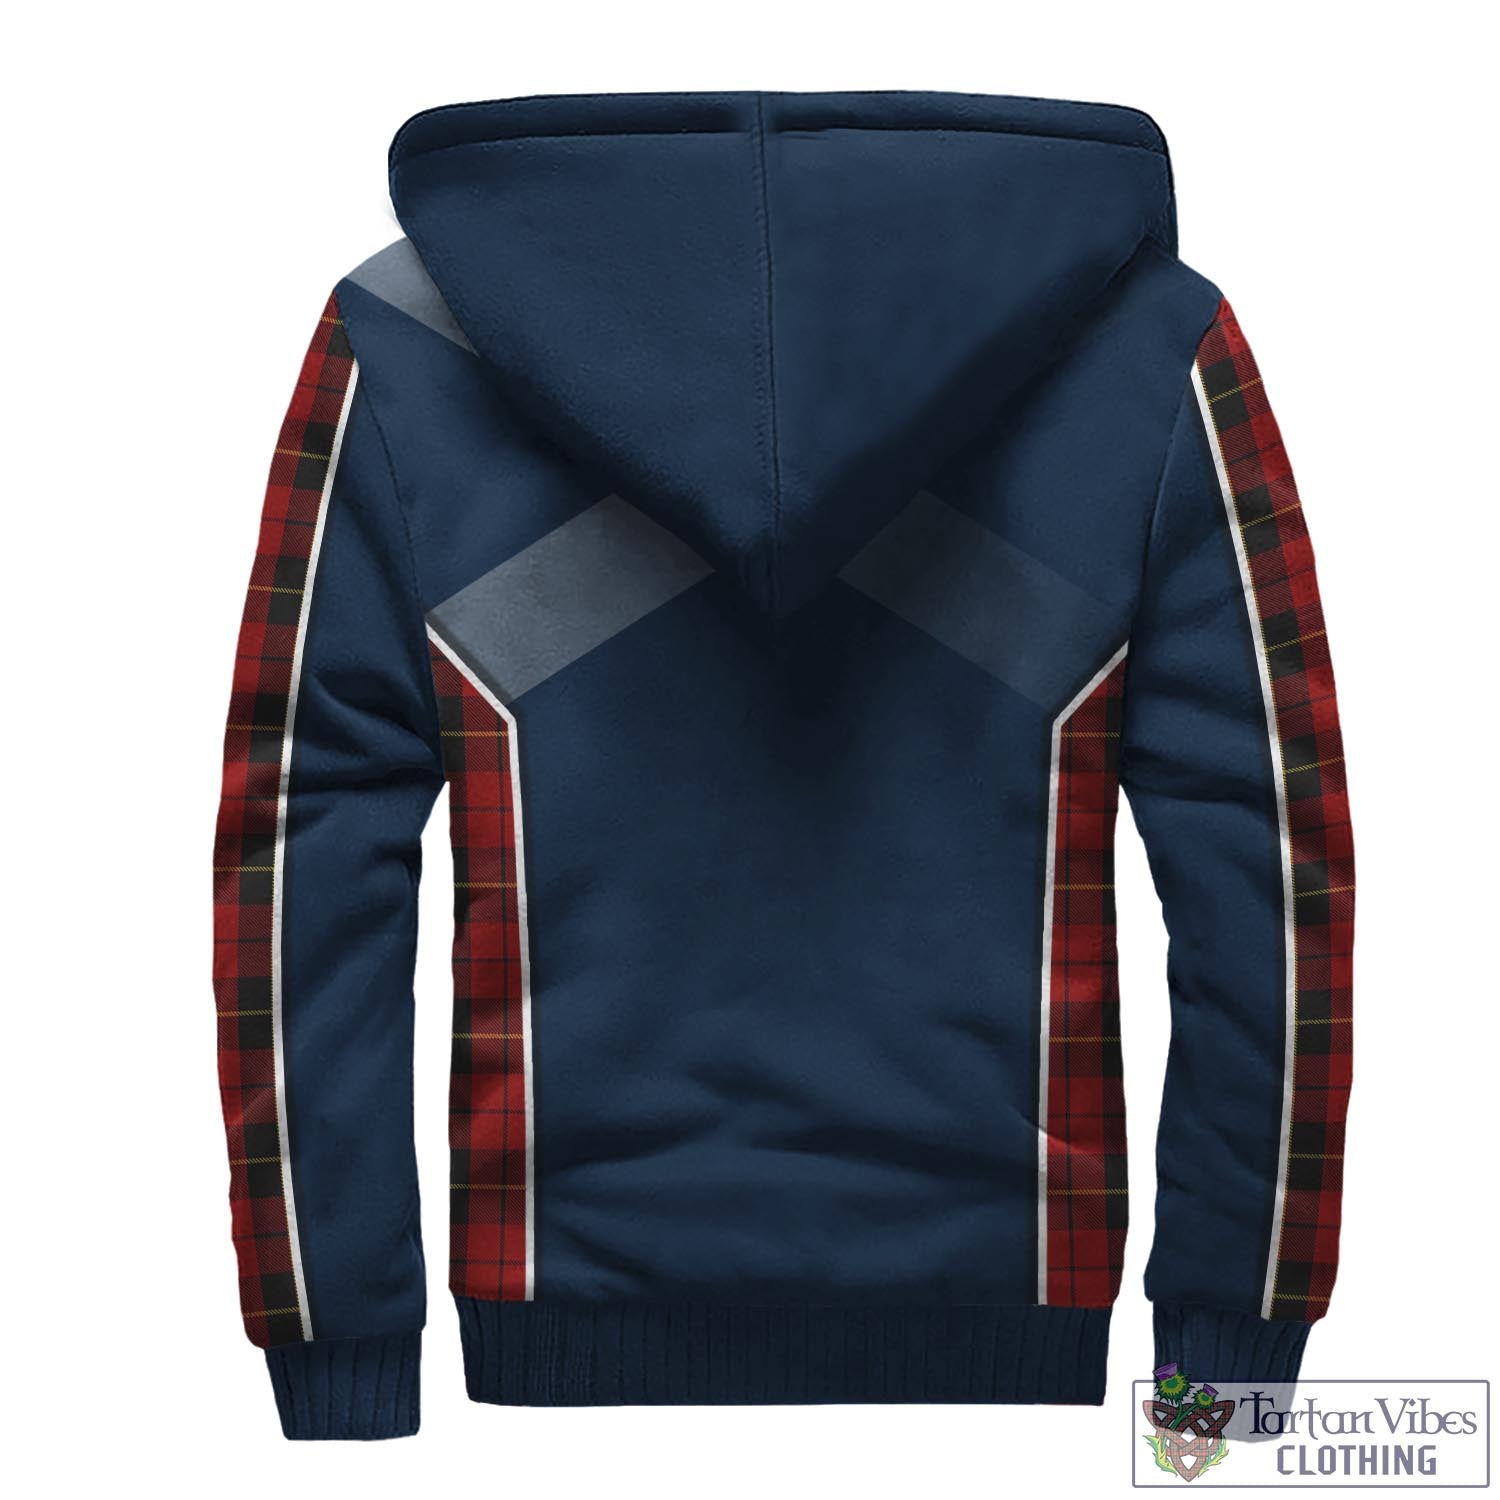 Tartan Vibes Clothing Wallace Tartan Sherpa Hoodie with Family Crest and Scottish Thistle Vibes Sport Style